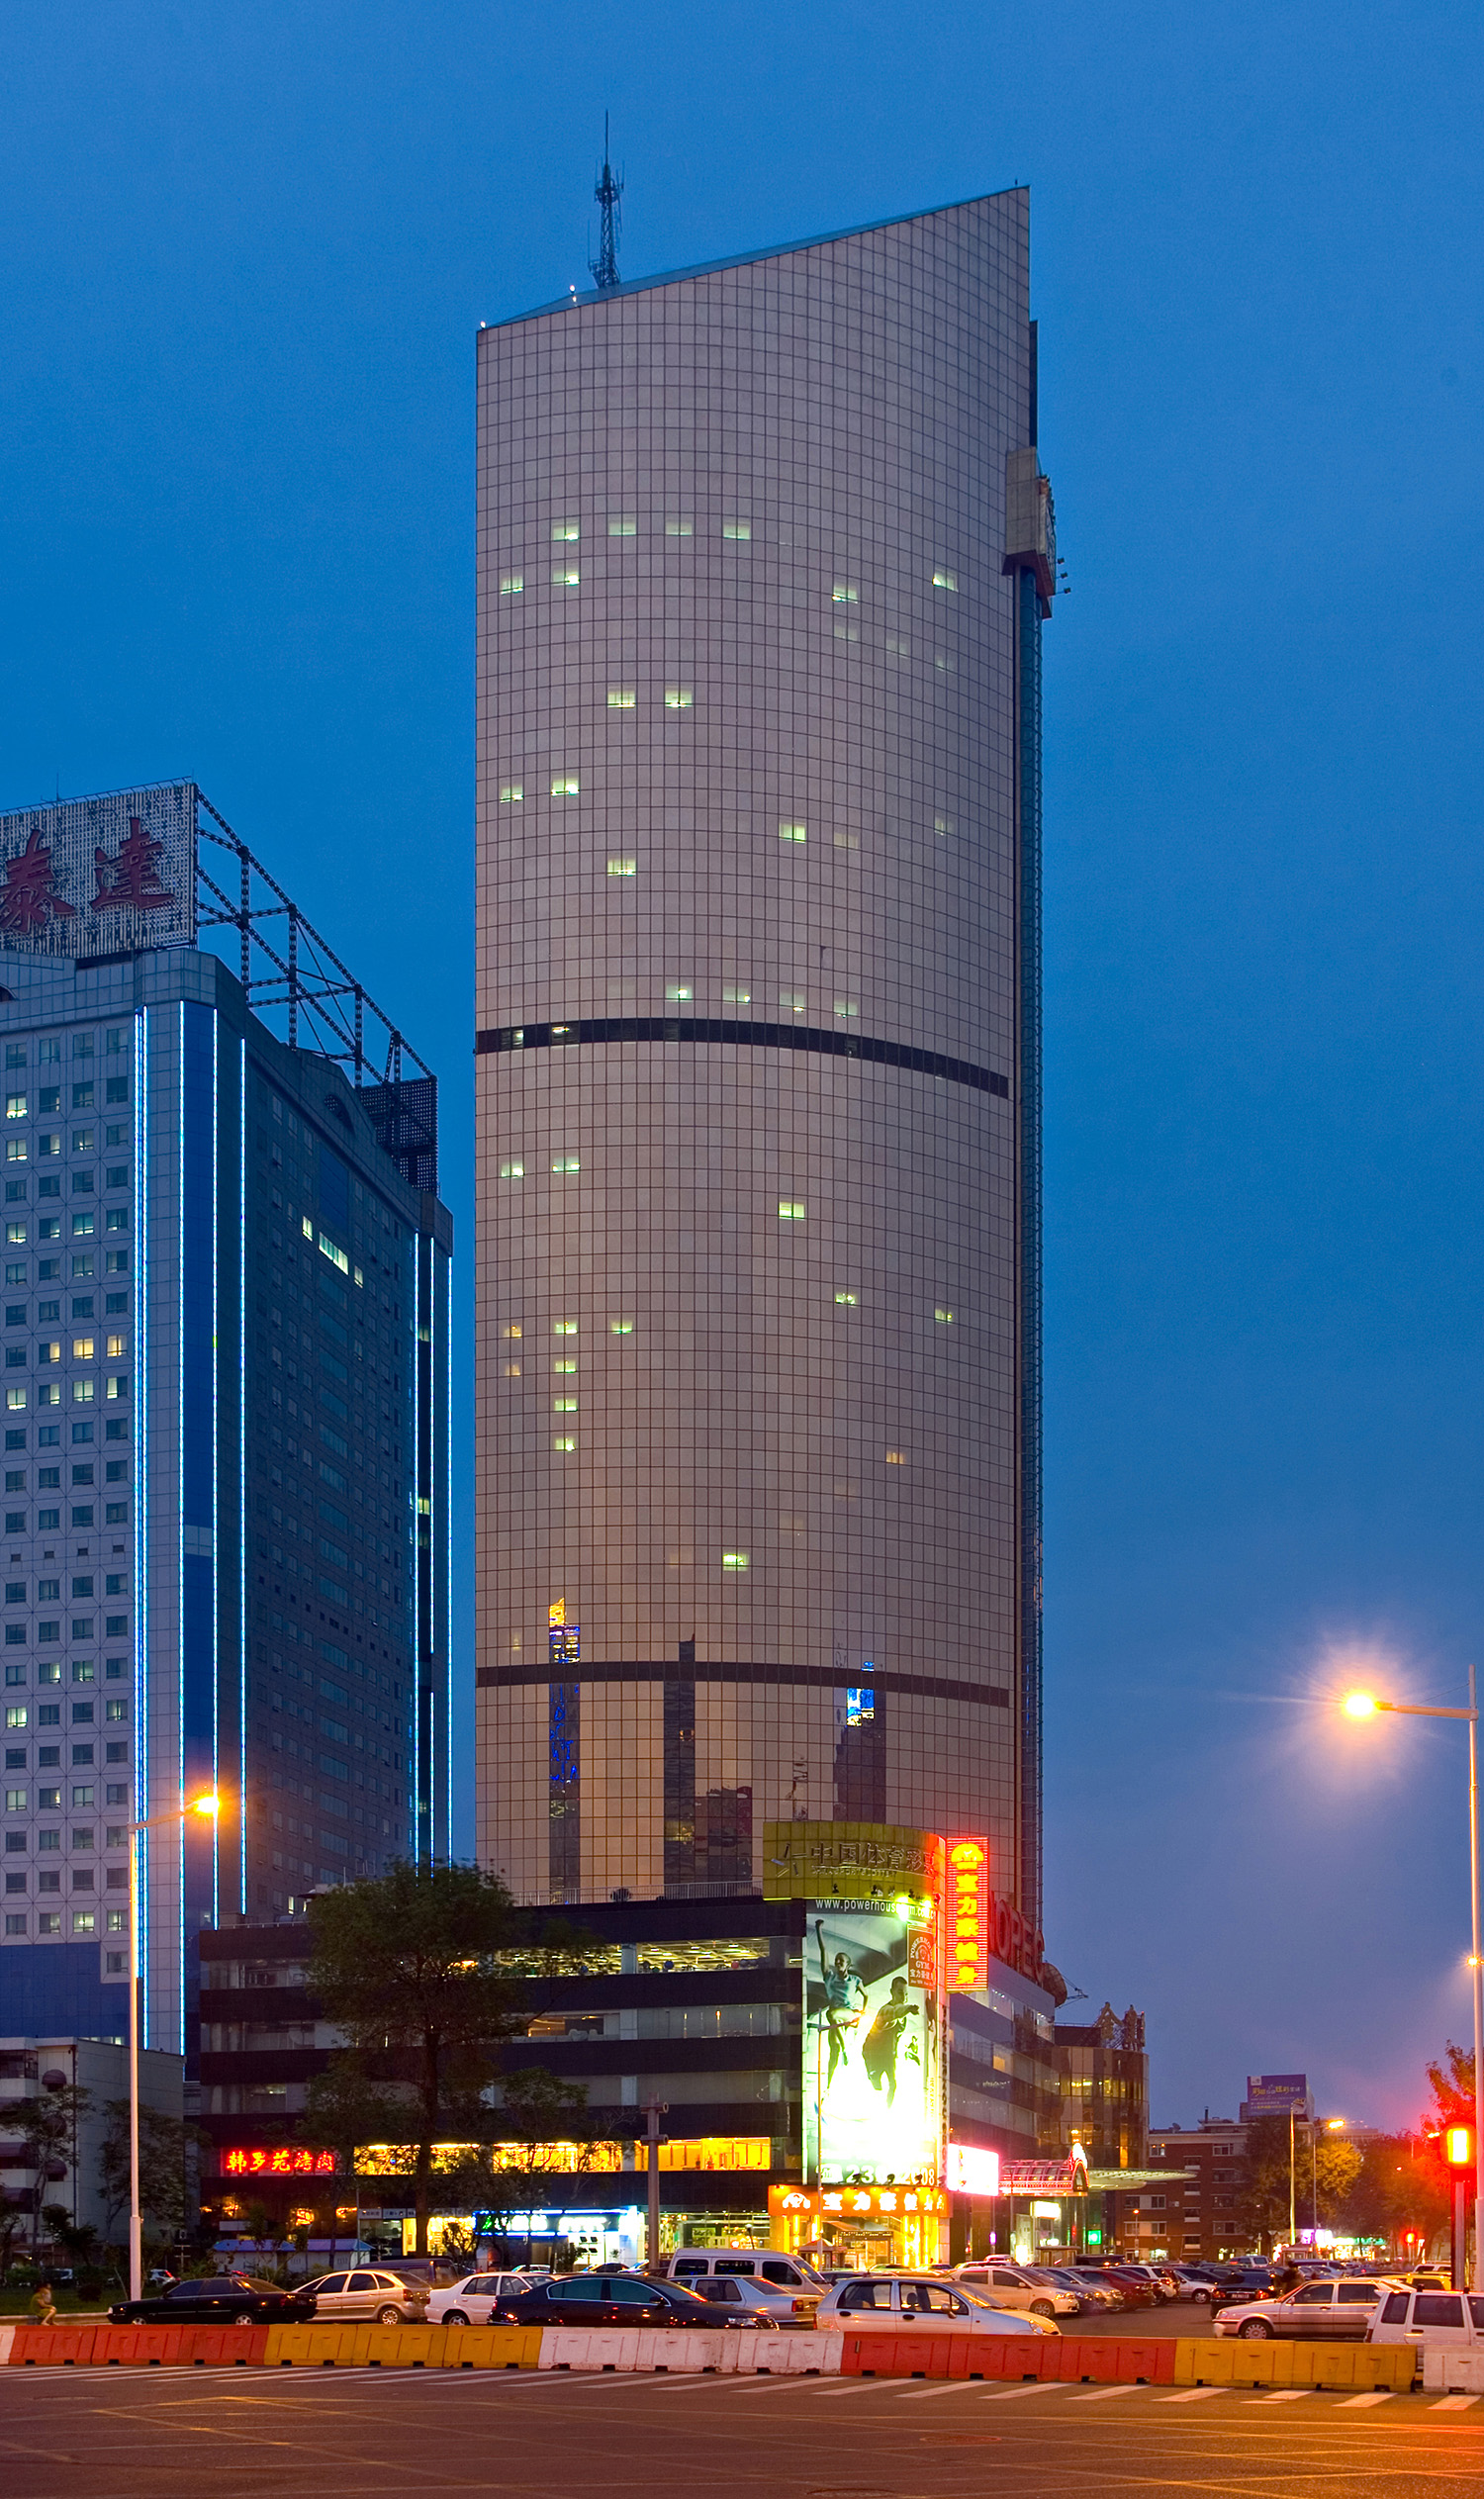 Golden Crown Tower, Tianjin - Night view from the northeast. © Mathias Beinling